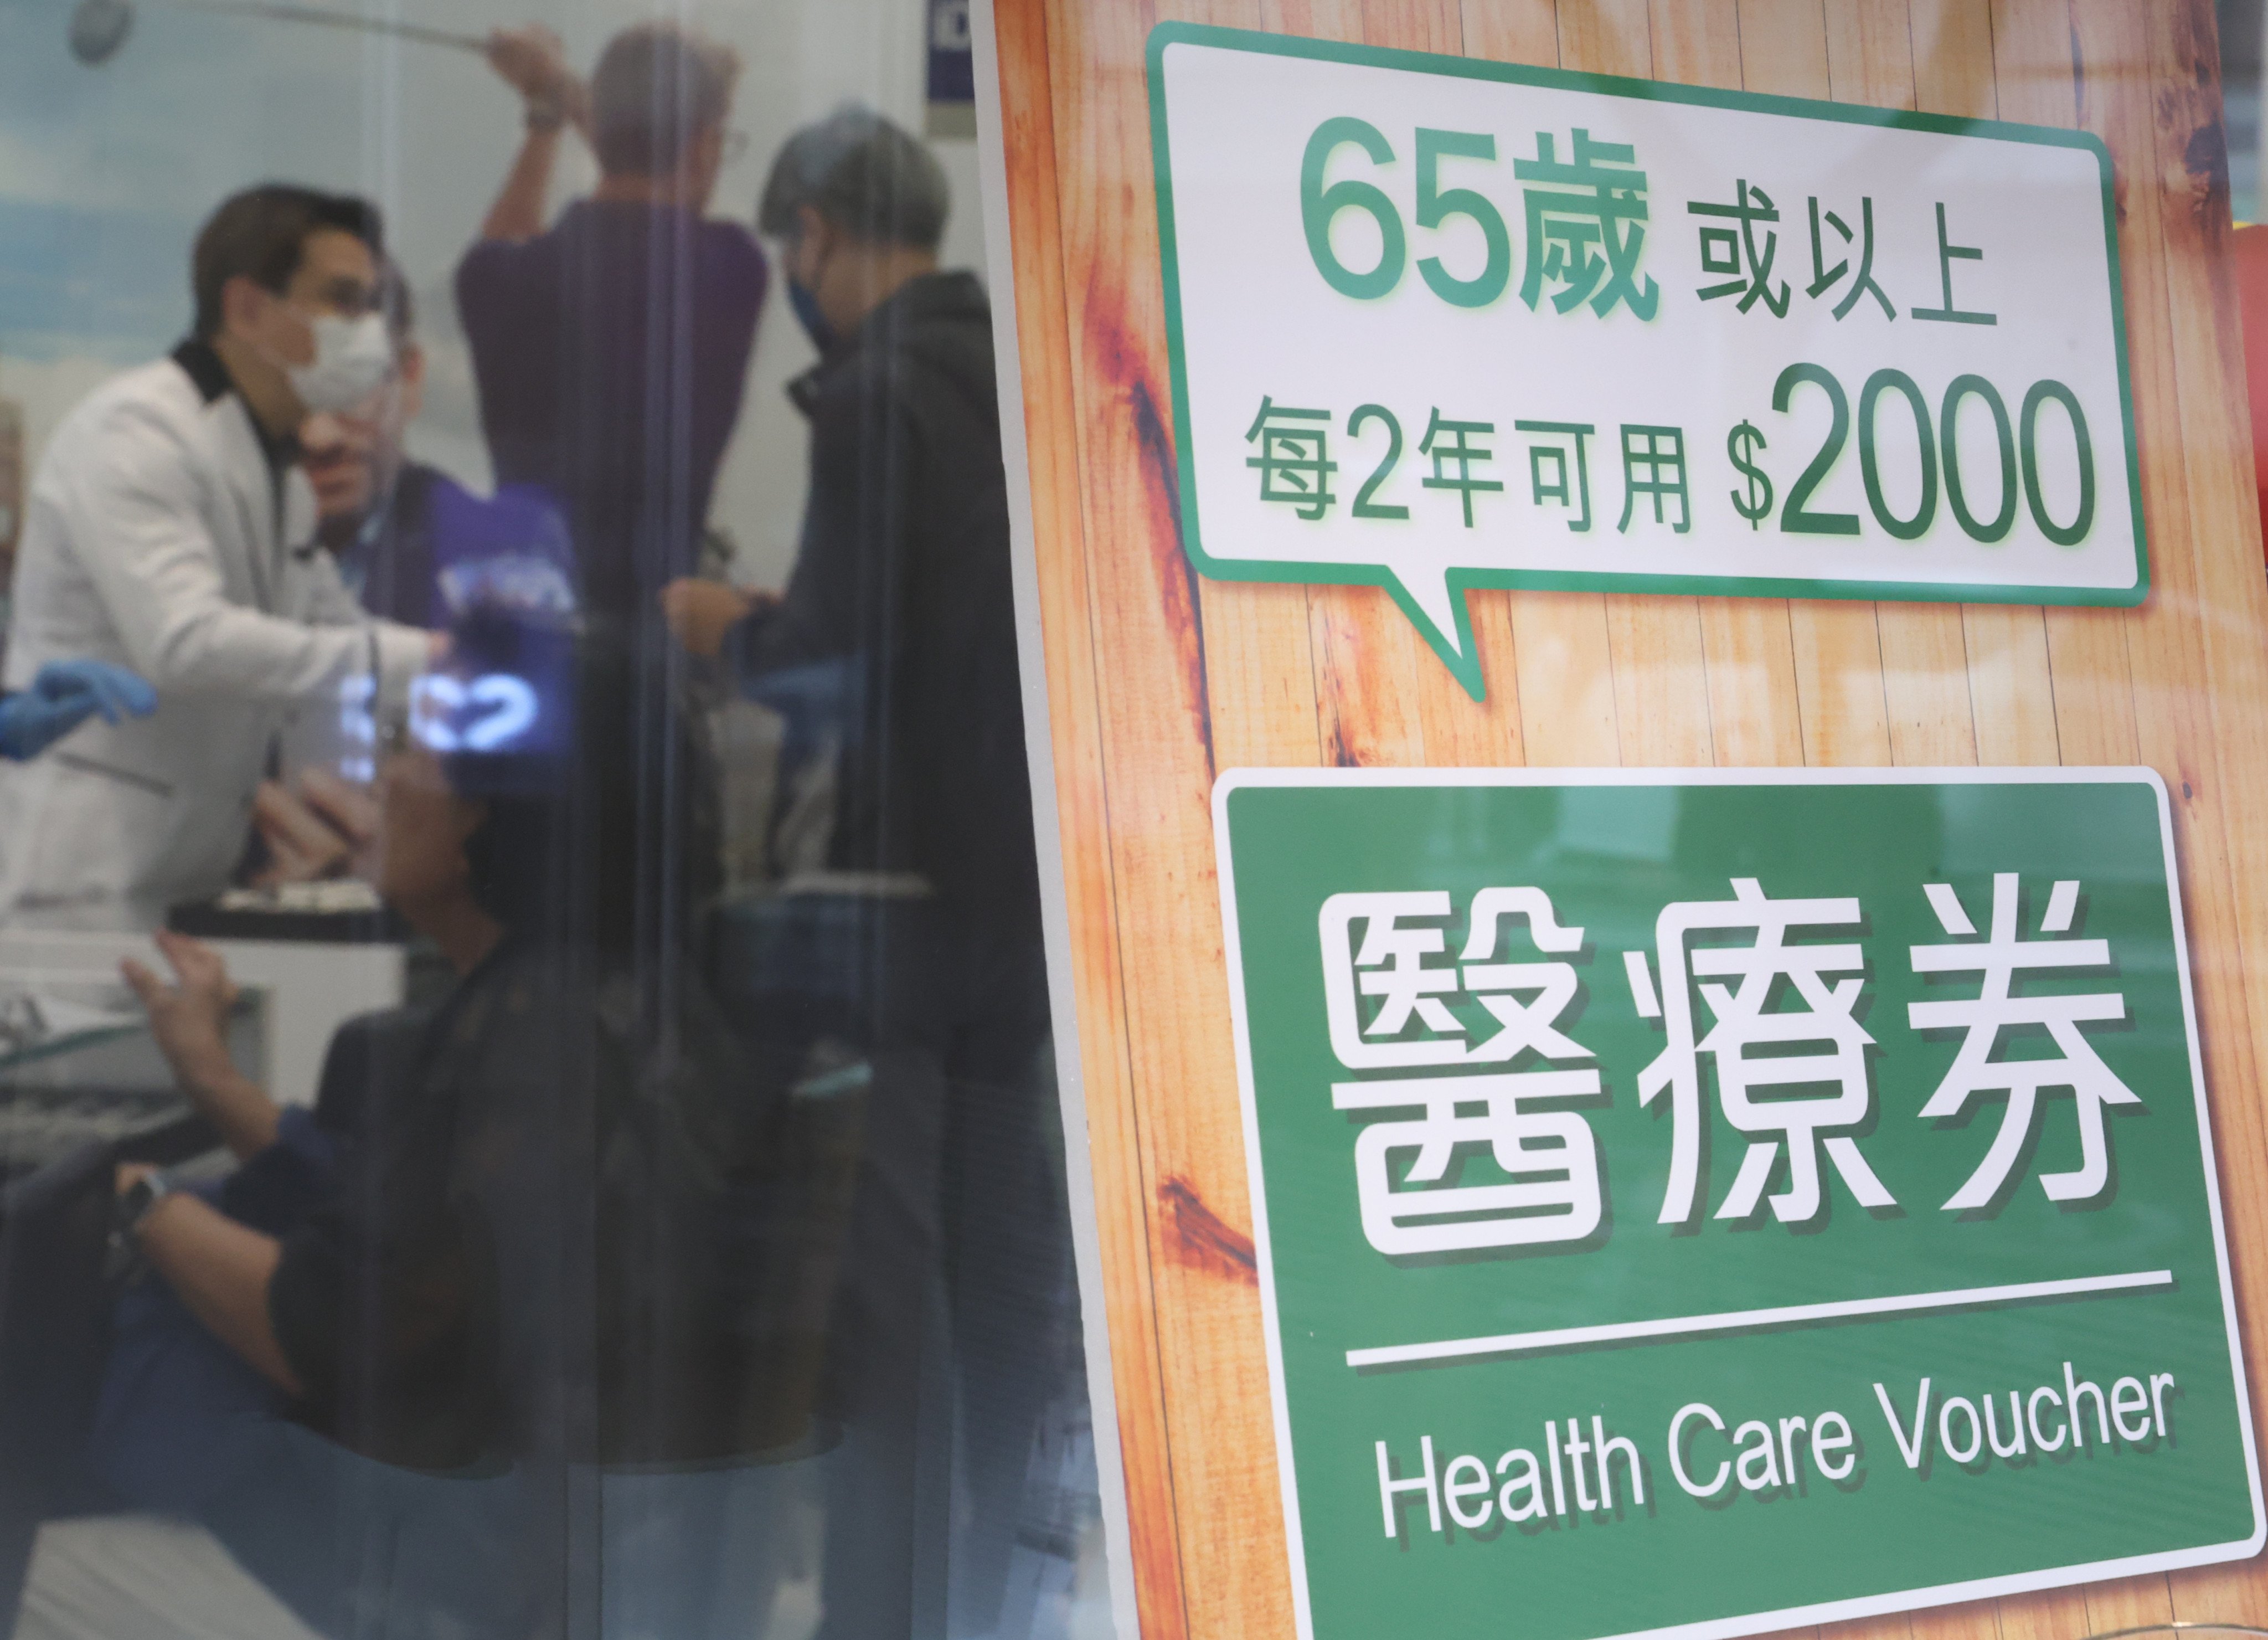 The scheme provides each person with a HK$2,000 healthcare voucher every year. Photo: Edmond So